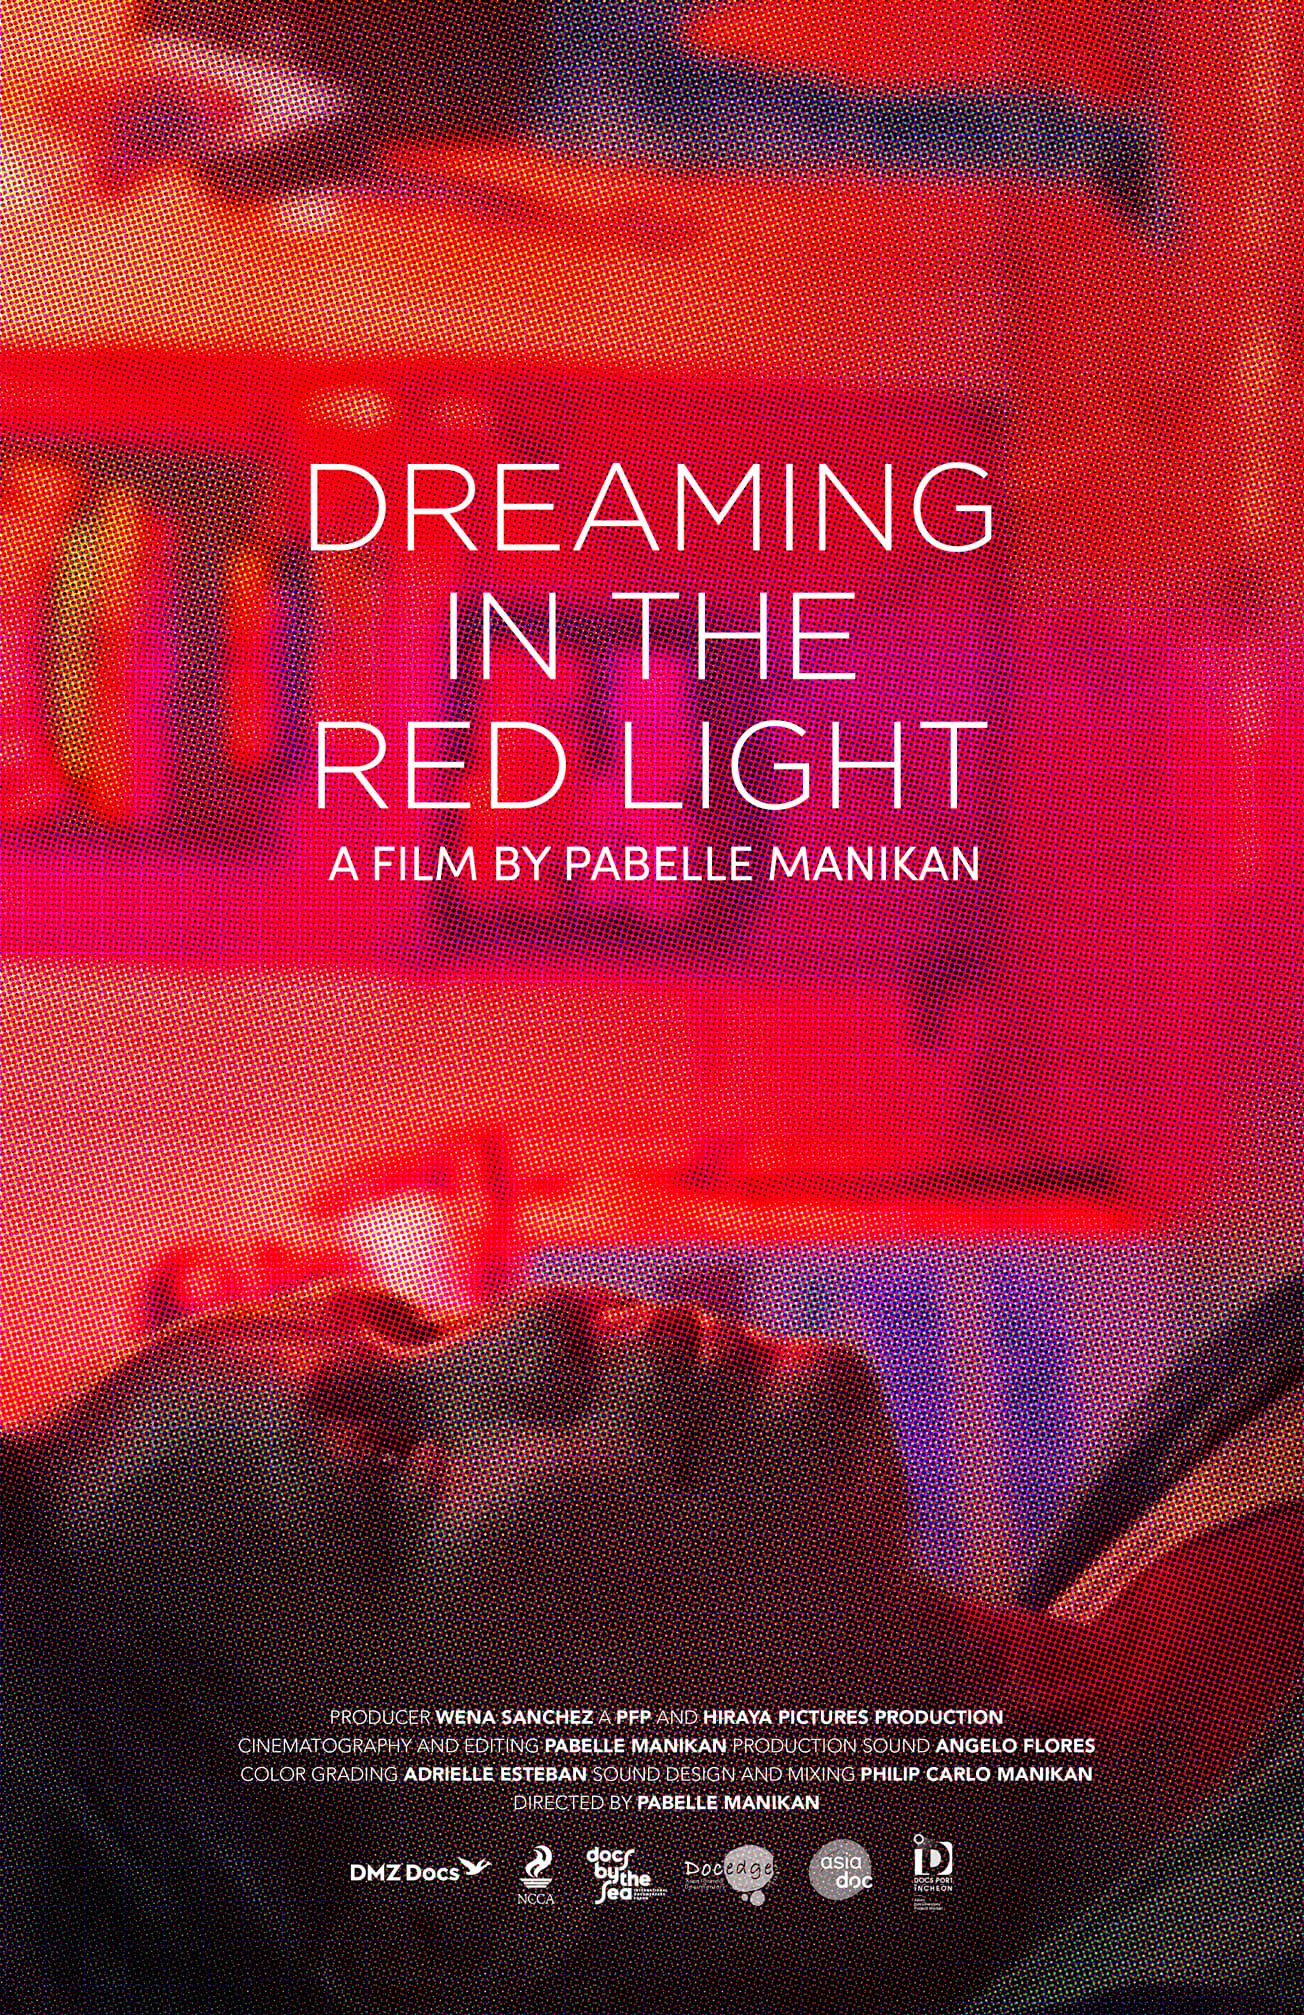 DREAMING IN THE RED LIGHT